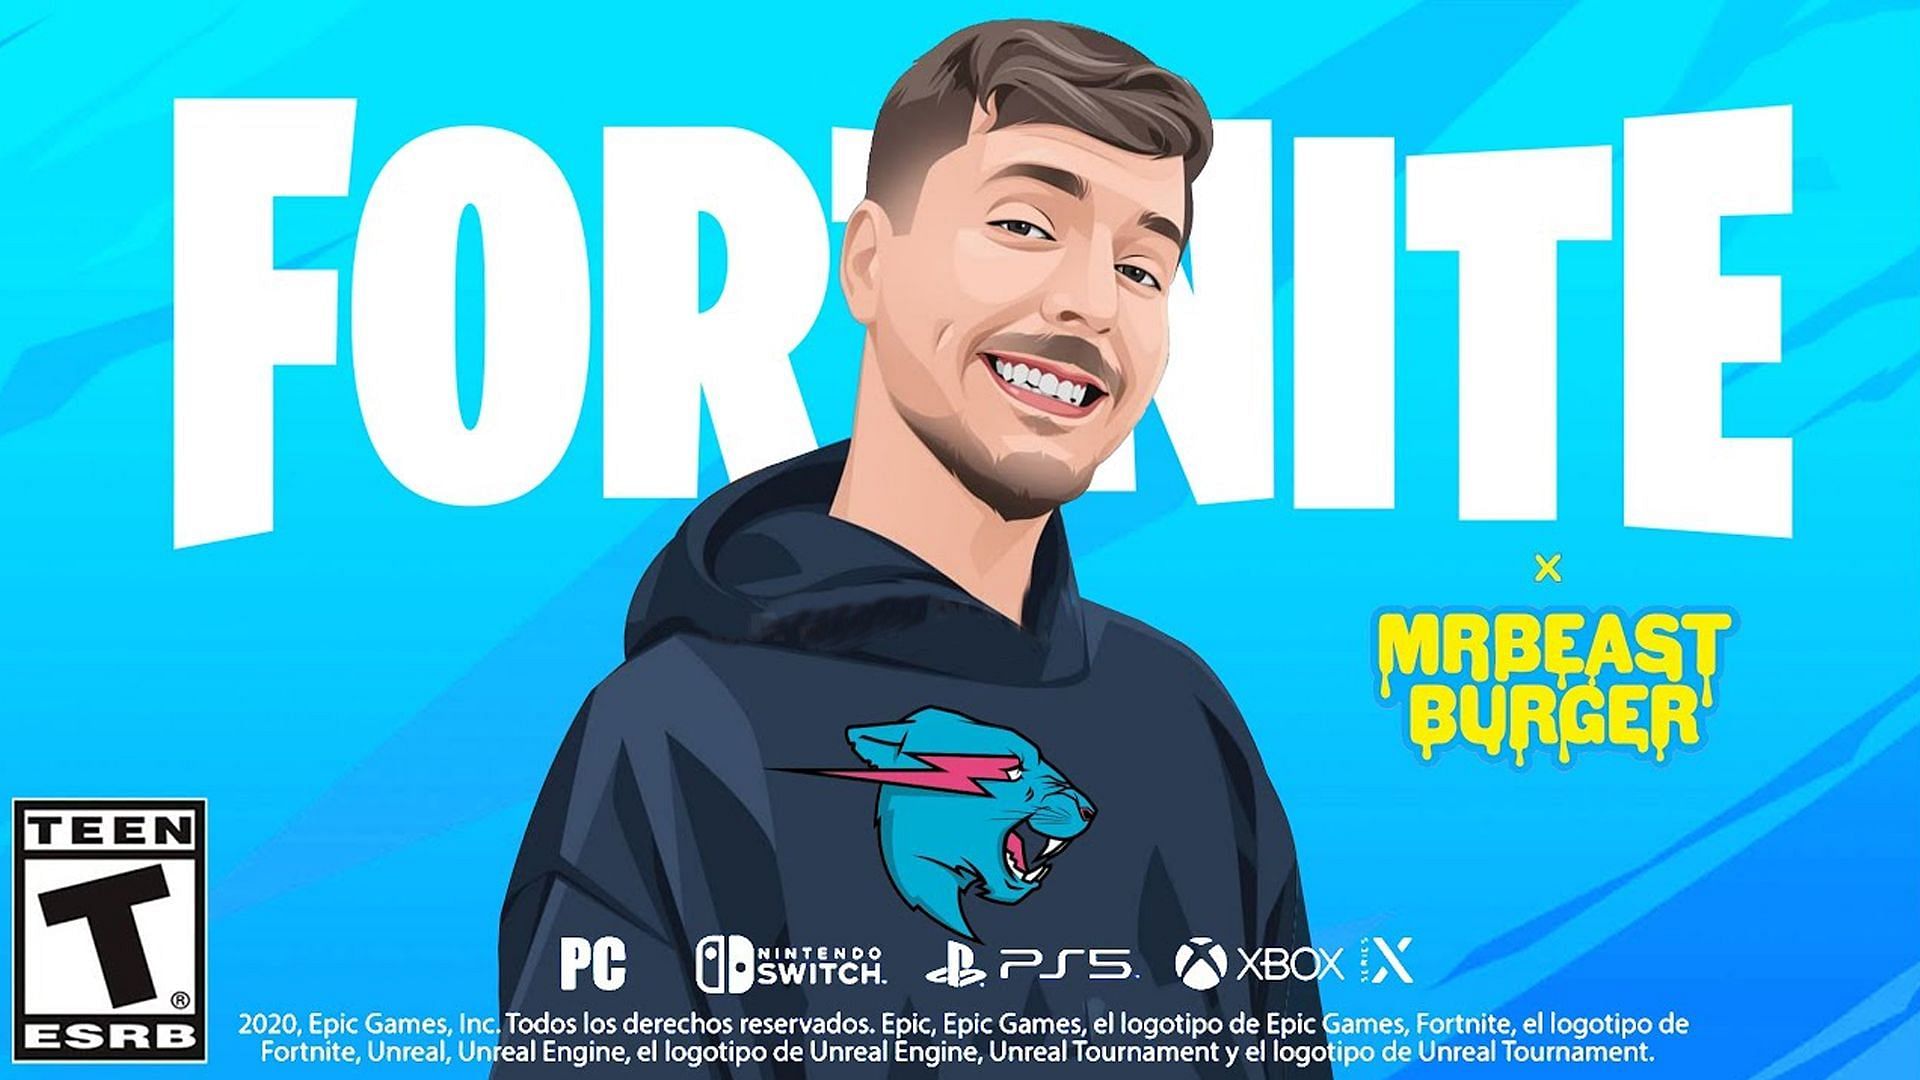 Fortnite: MrBeast and his burger franchise likely coming to the game